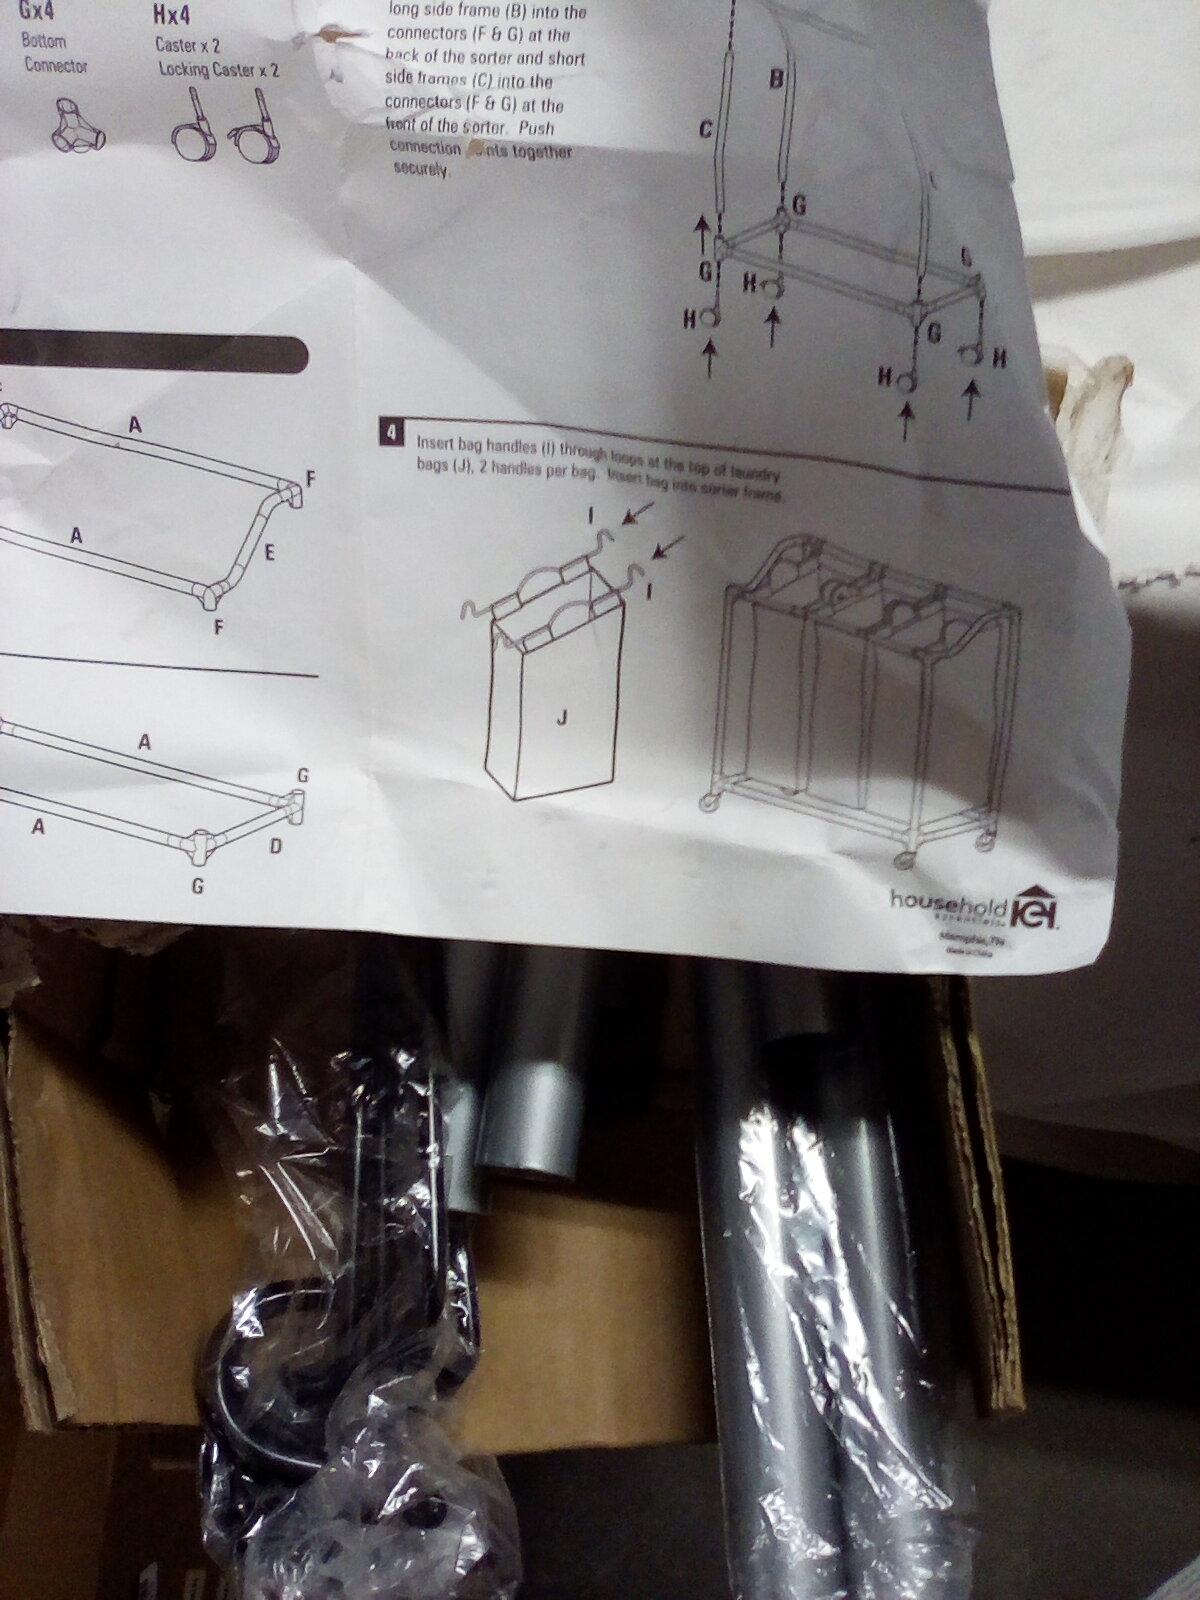 Standup Laundry sorter with instructions